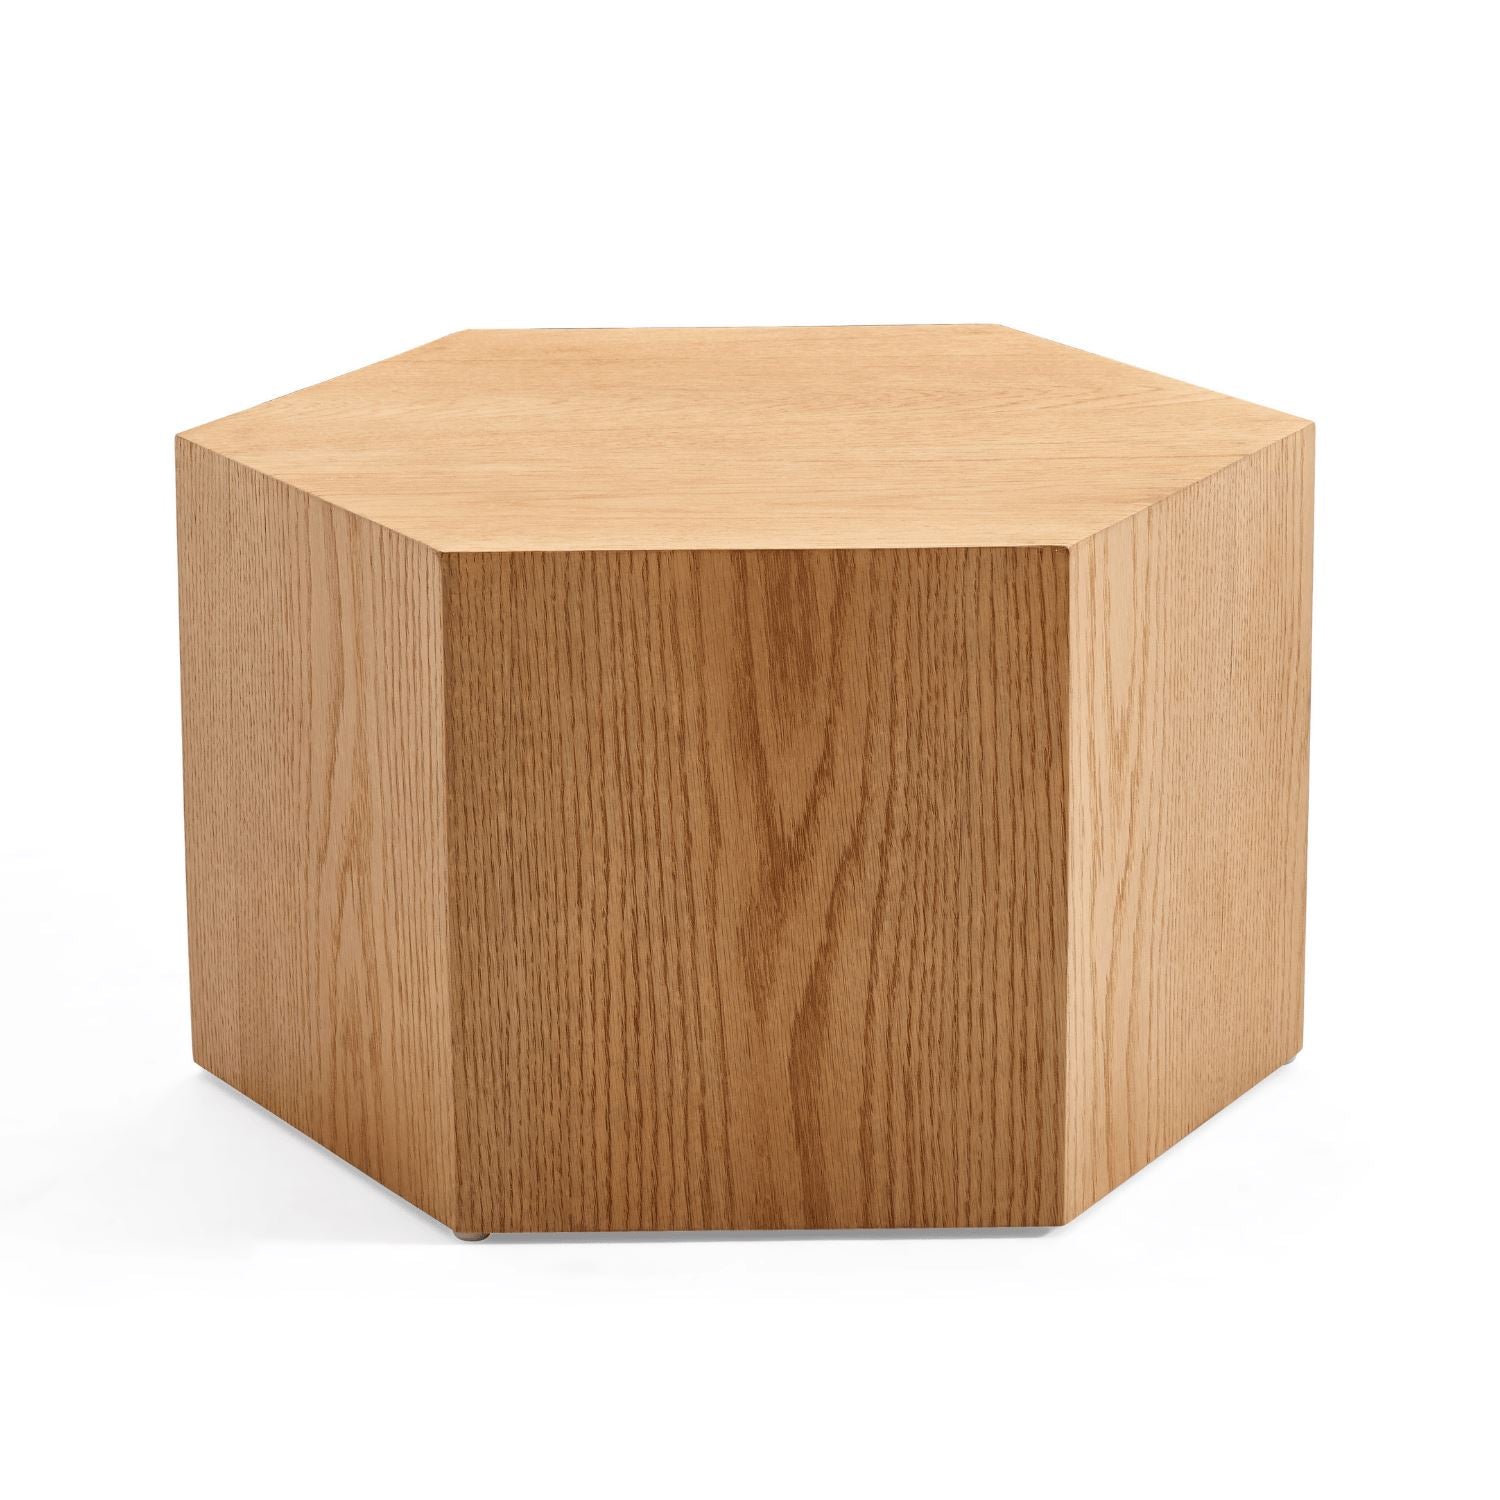 Valsun Side Table - Valyou 